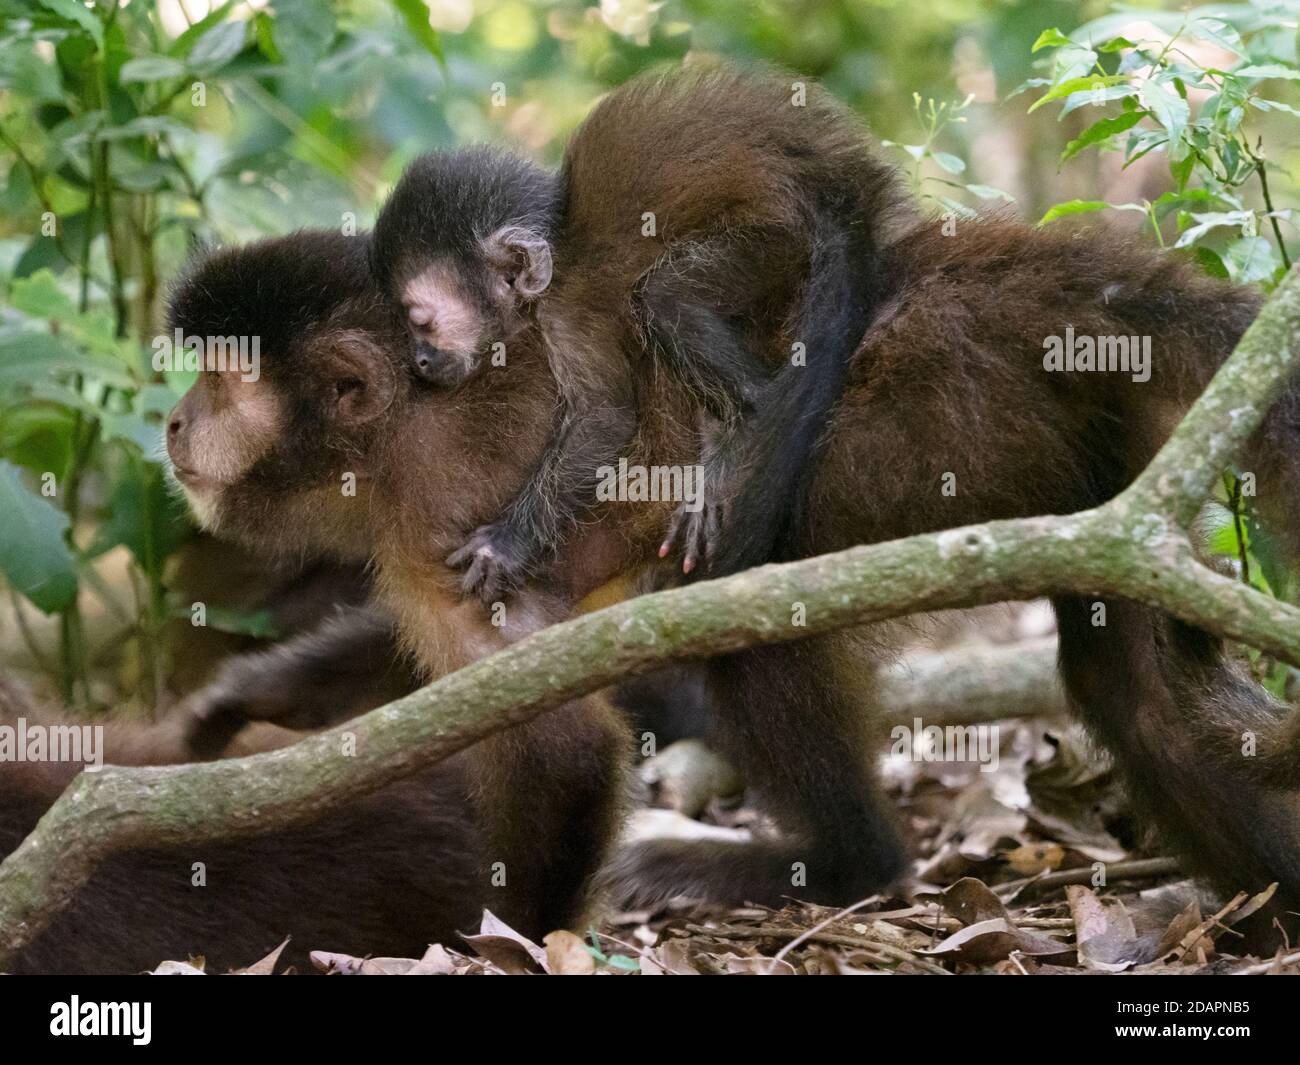 An adult black capuchin, Sapajus nigritus, with youngster on its back at Iguazú Falls, Misiones Province, Argentina. Stock Photo